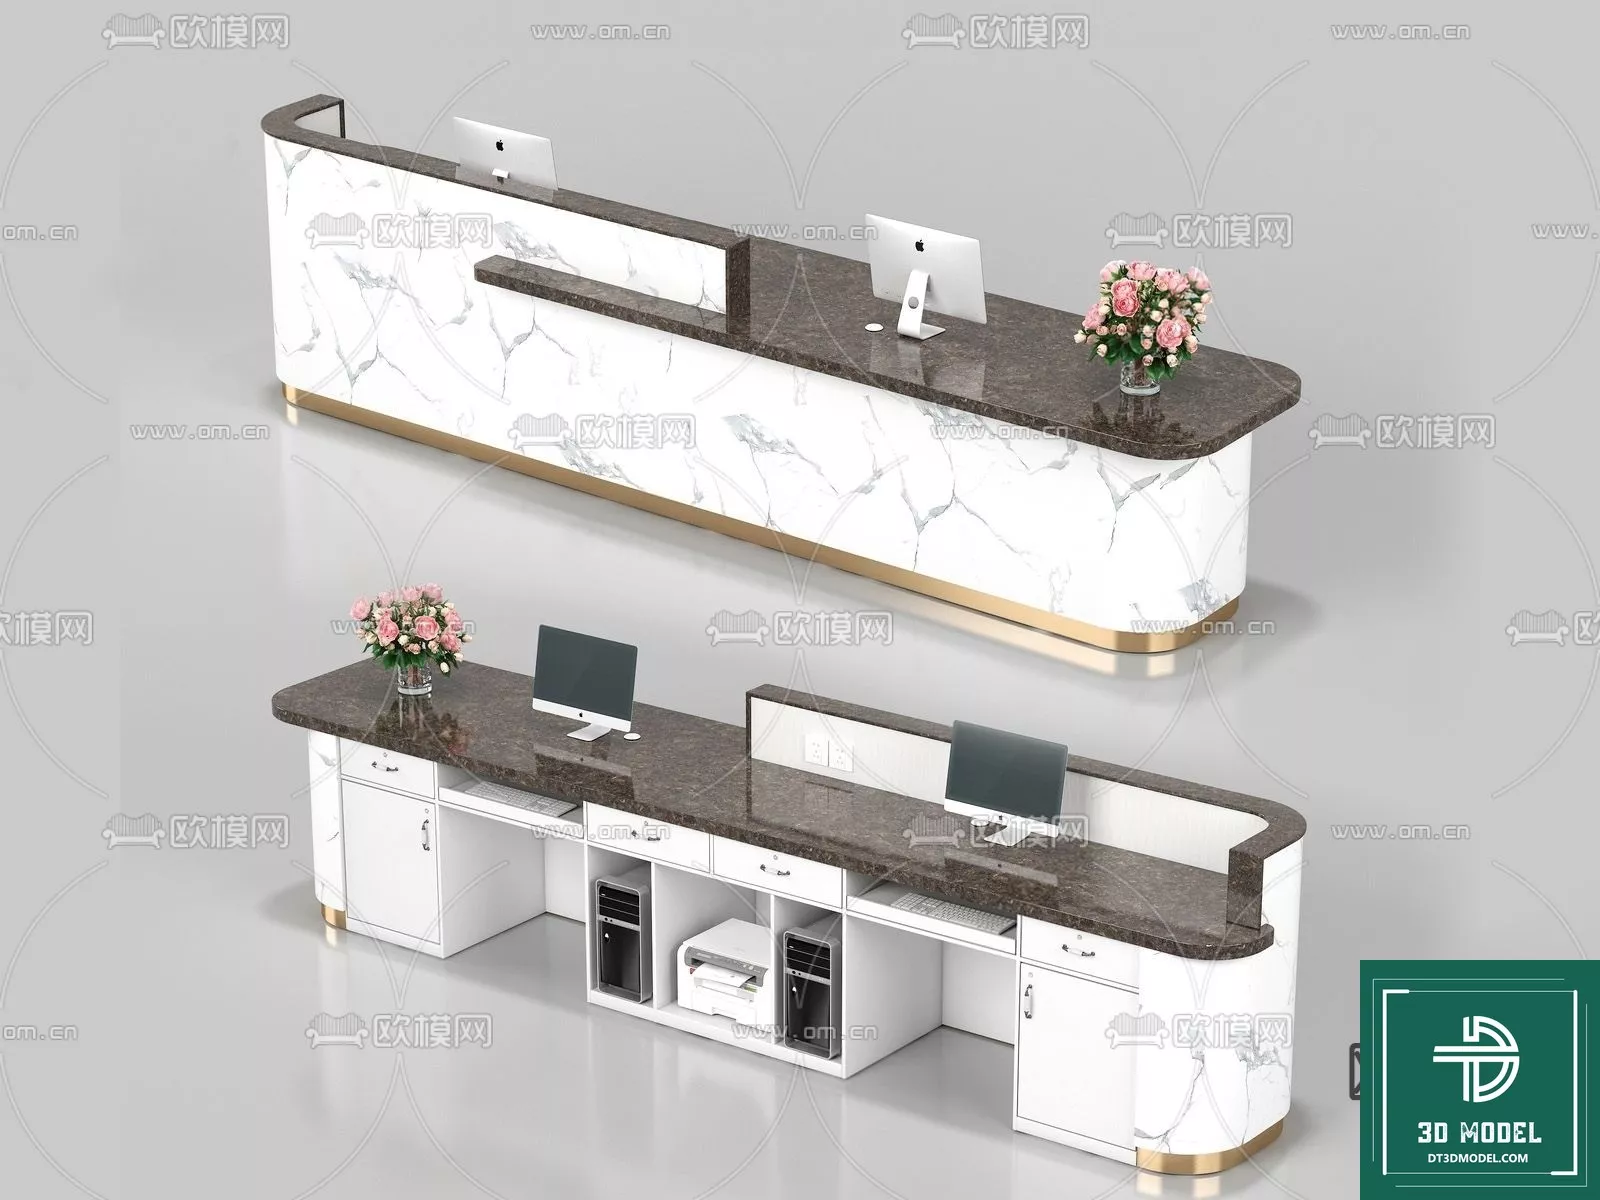 NEO CLASSIC RECEPTION - SKETCHUP 3D MODEL - VRAY OR ENSCAPE - ID17234